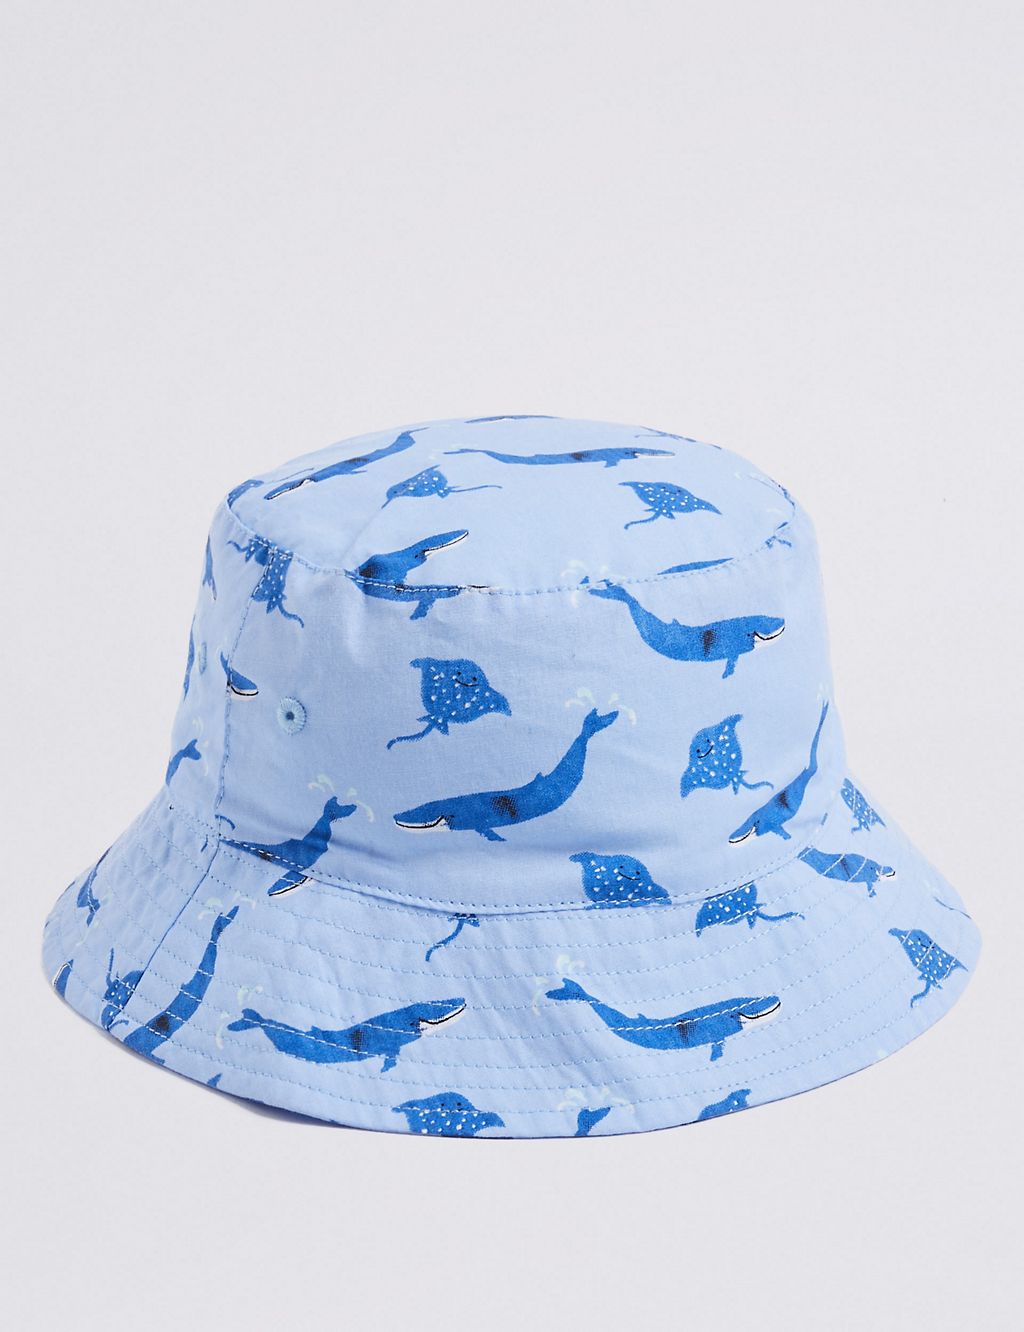 Kids' 2 Pack Pure Cotton Bucket Hat & Cap (0 Month - 6 Years) 1 of 5